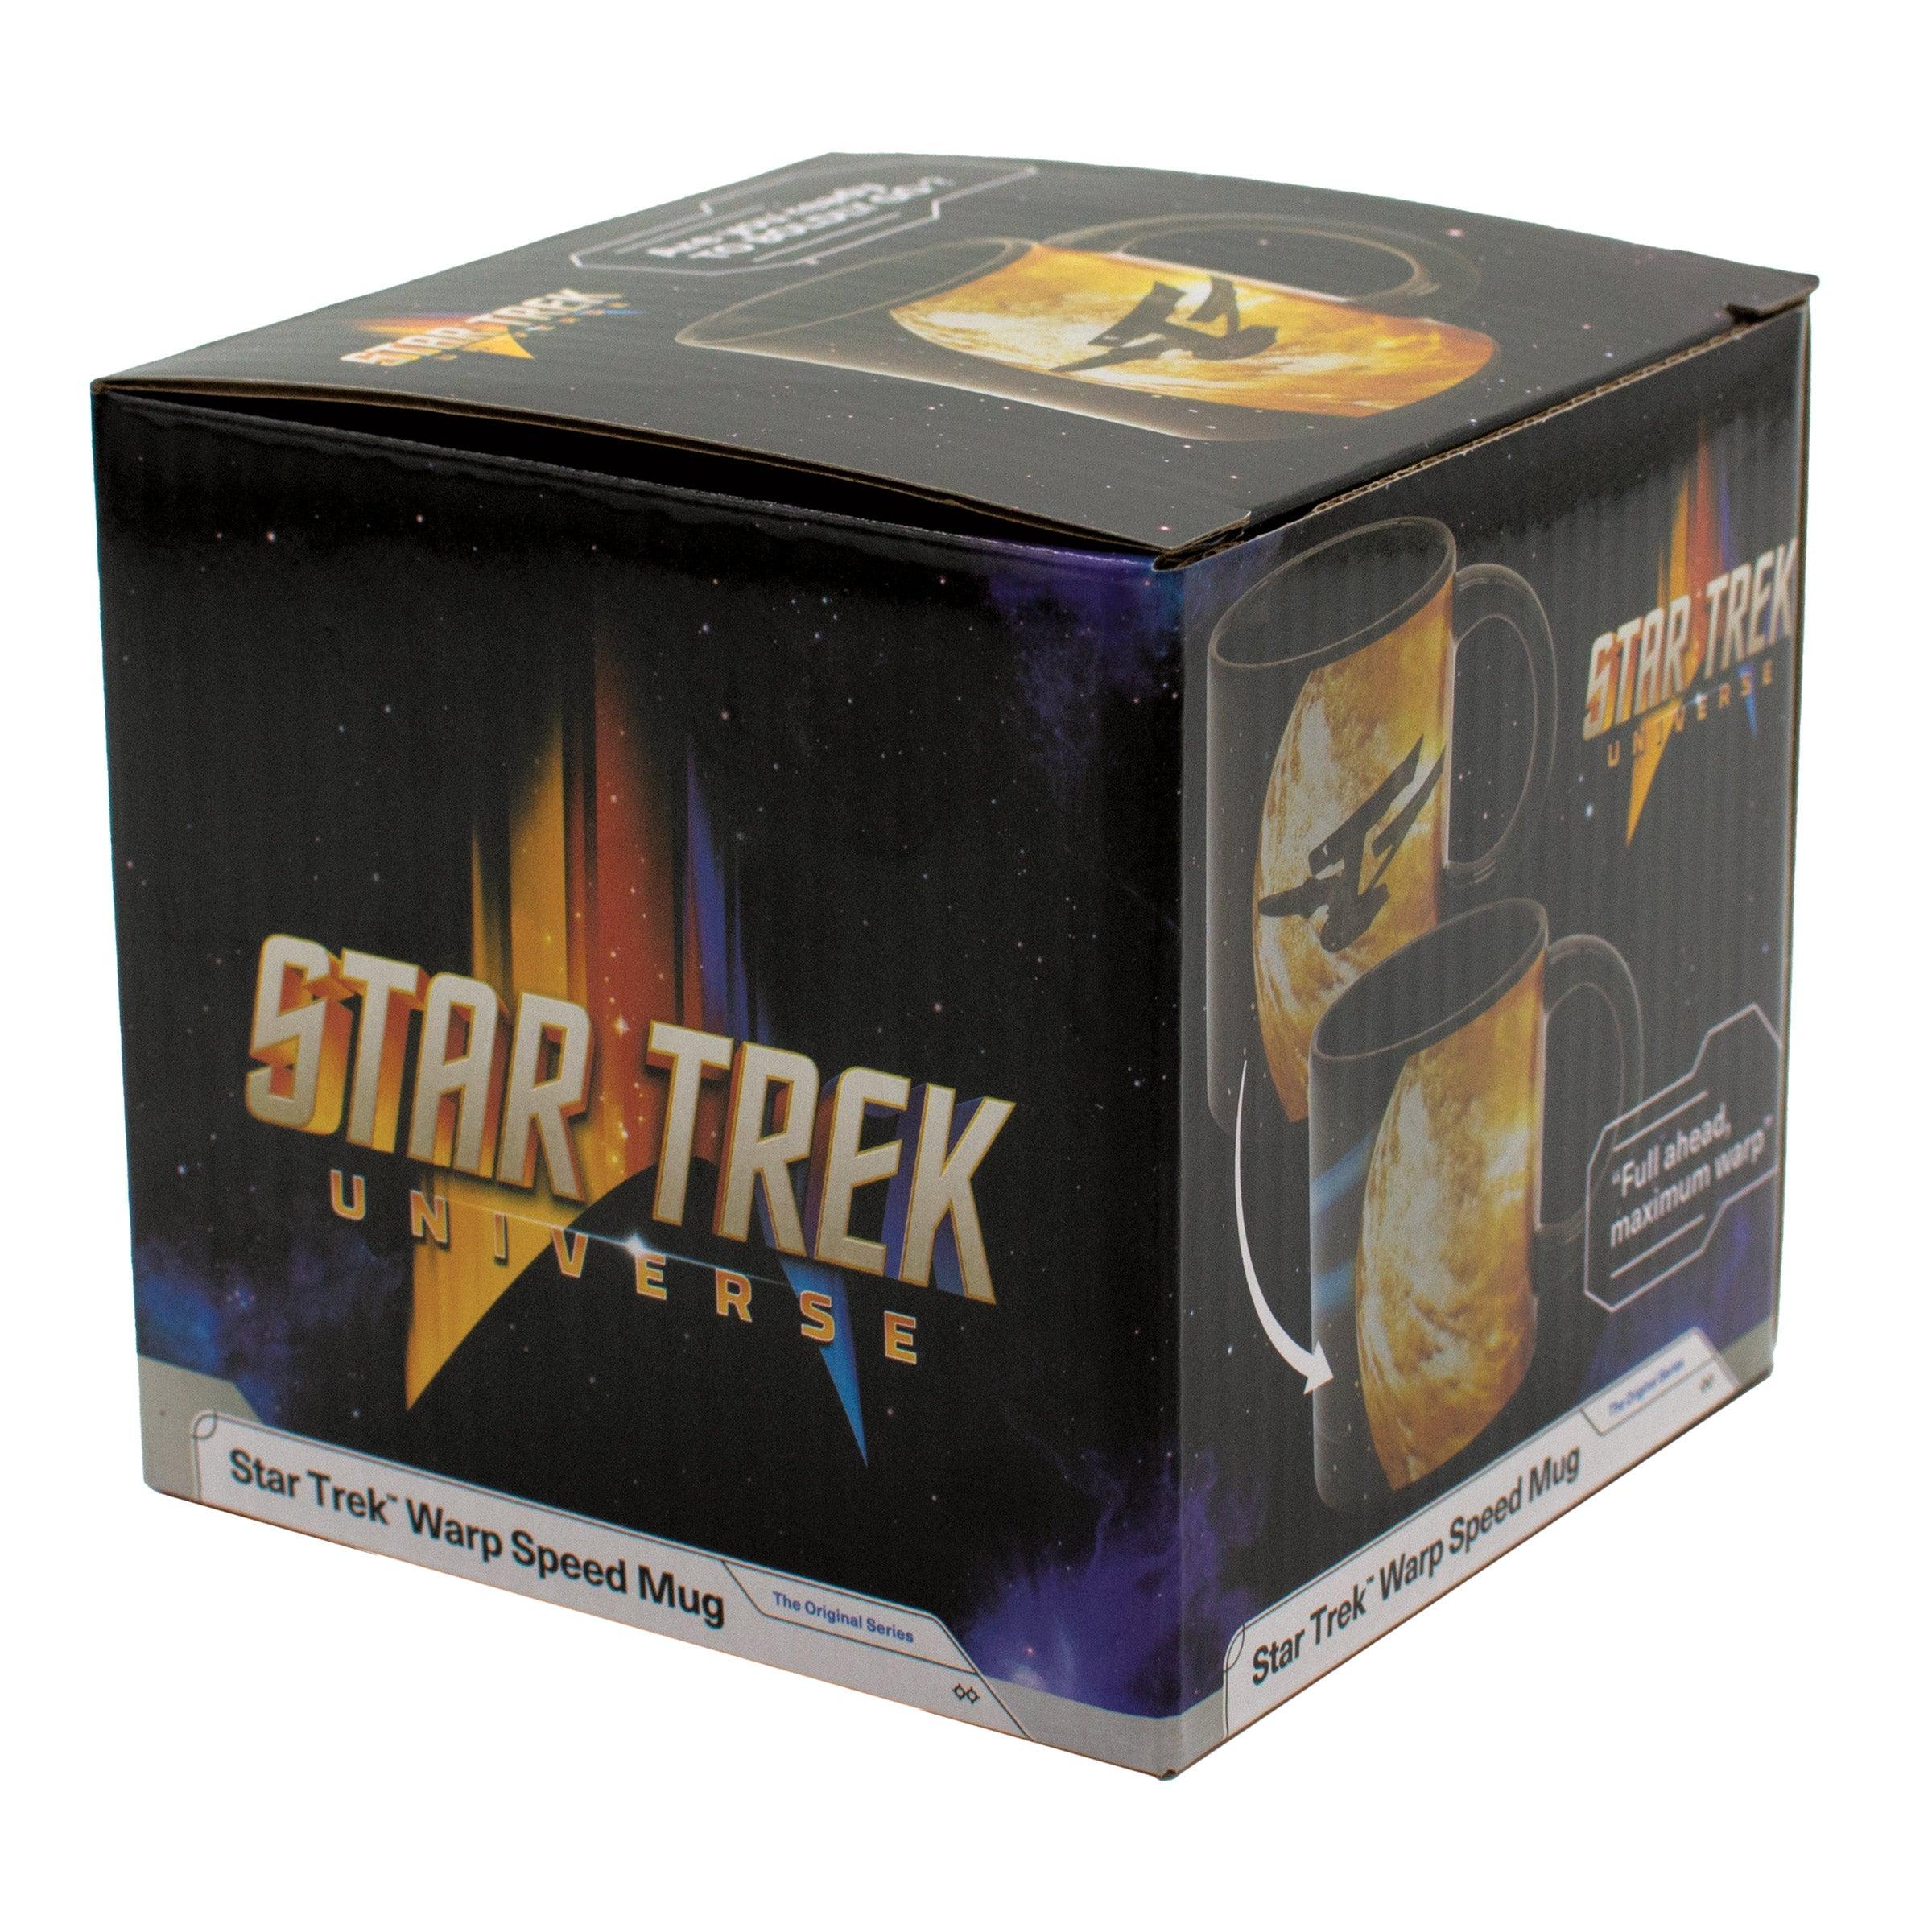 Product photo of Star Trek Warp Mug, a novelty gift manufactured by The Unemployed Philosophers Guild.